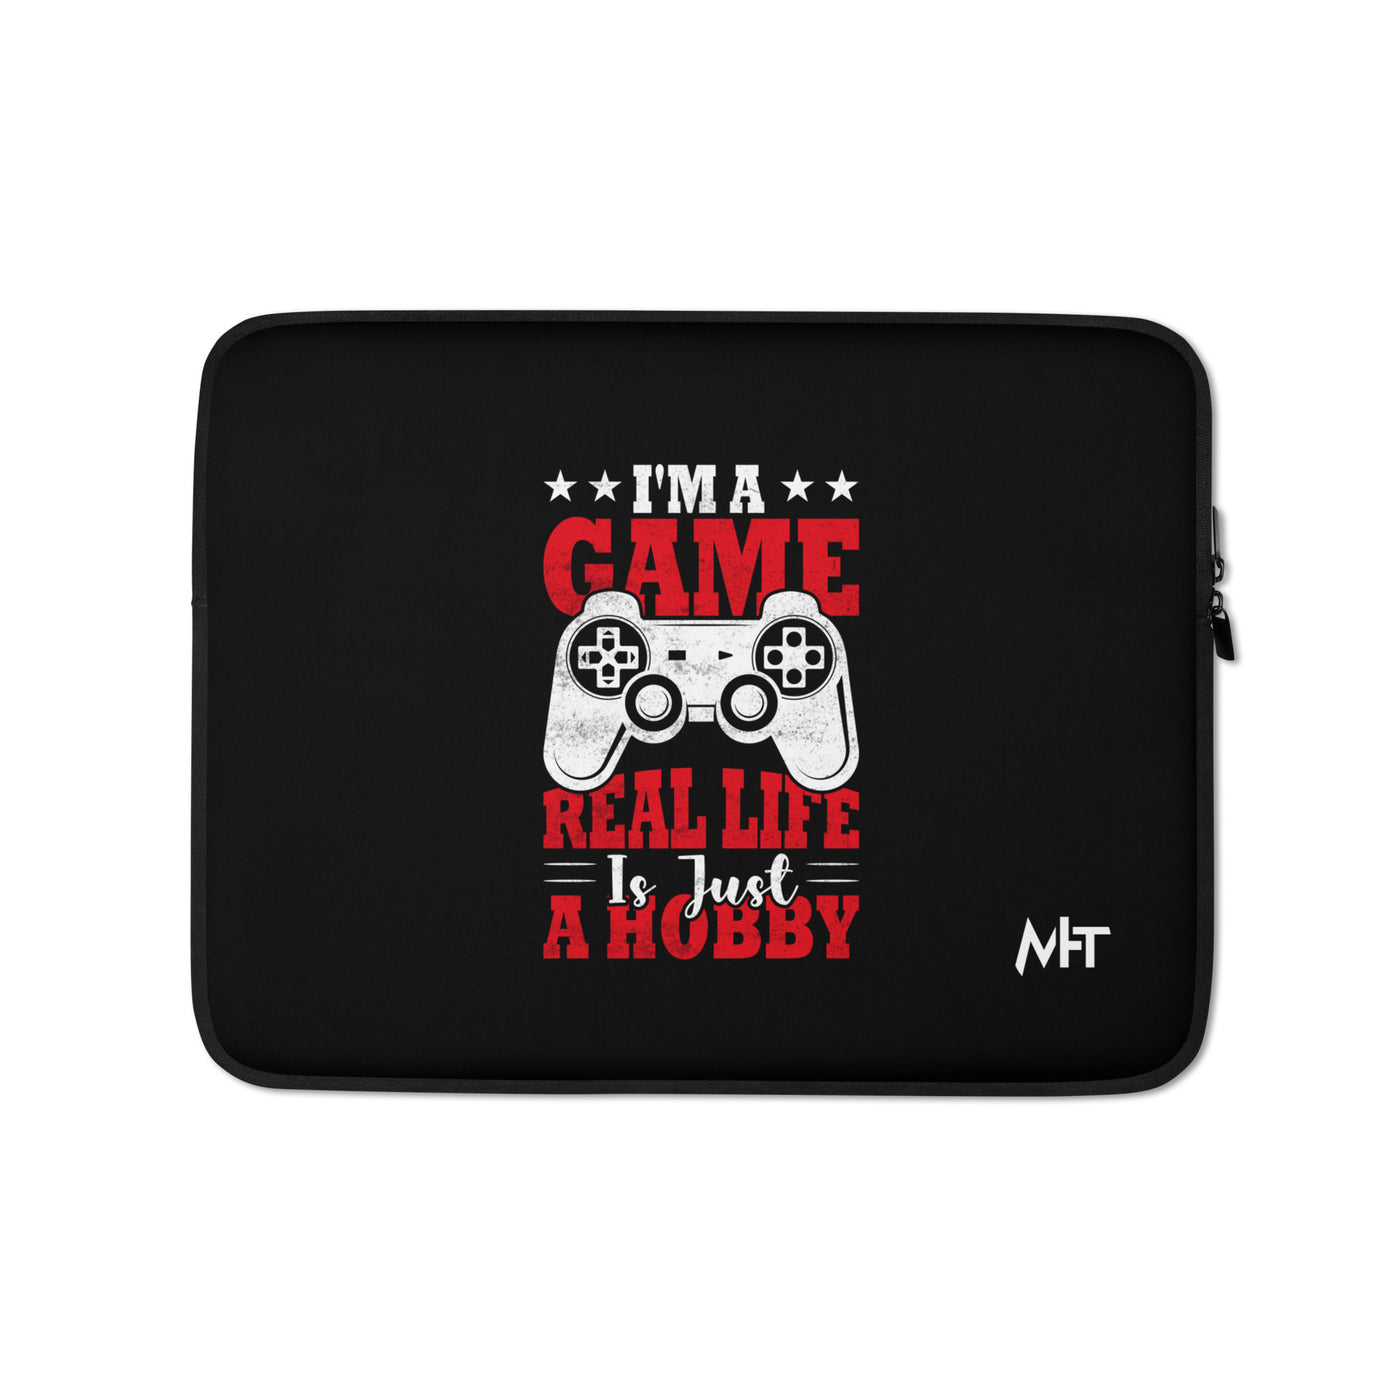 I am a Game; Real life is just a Hobby - Laptop Sleeve